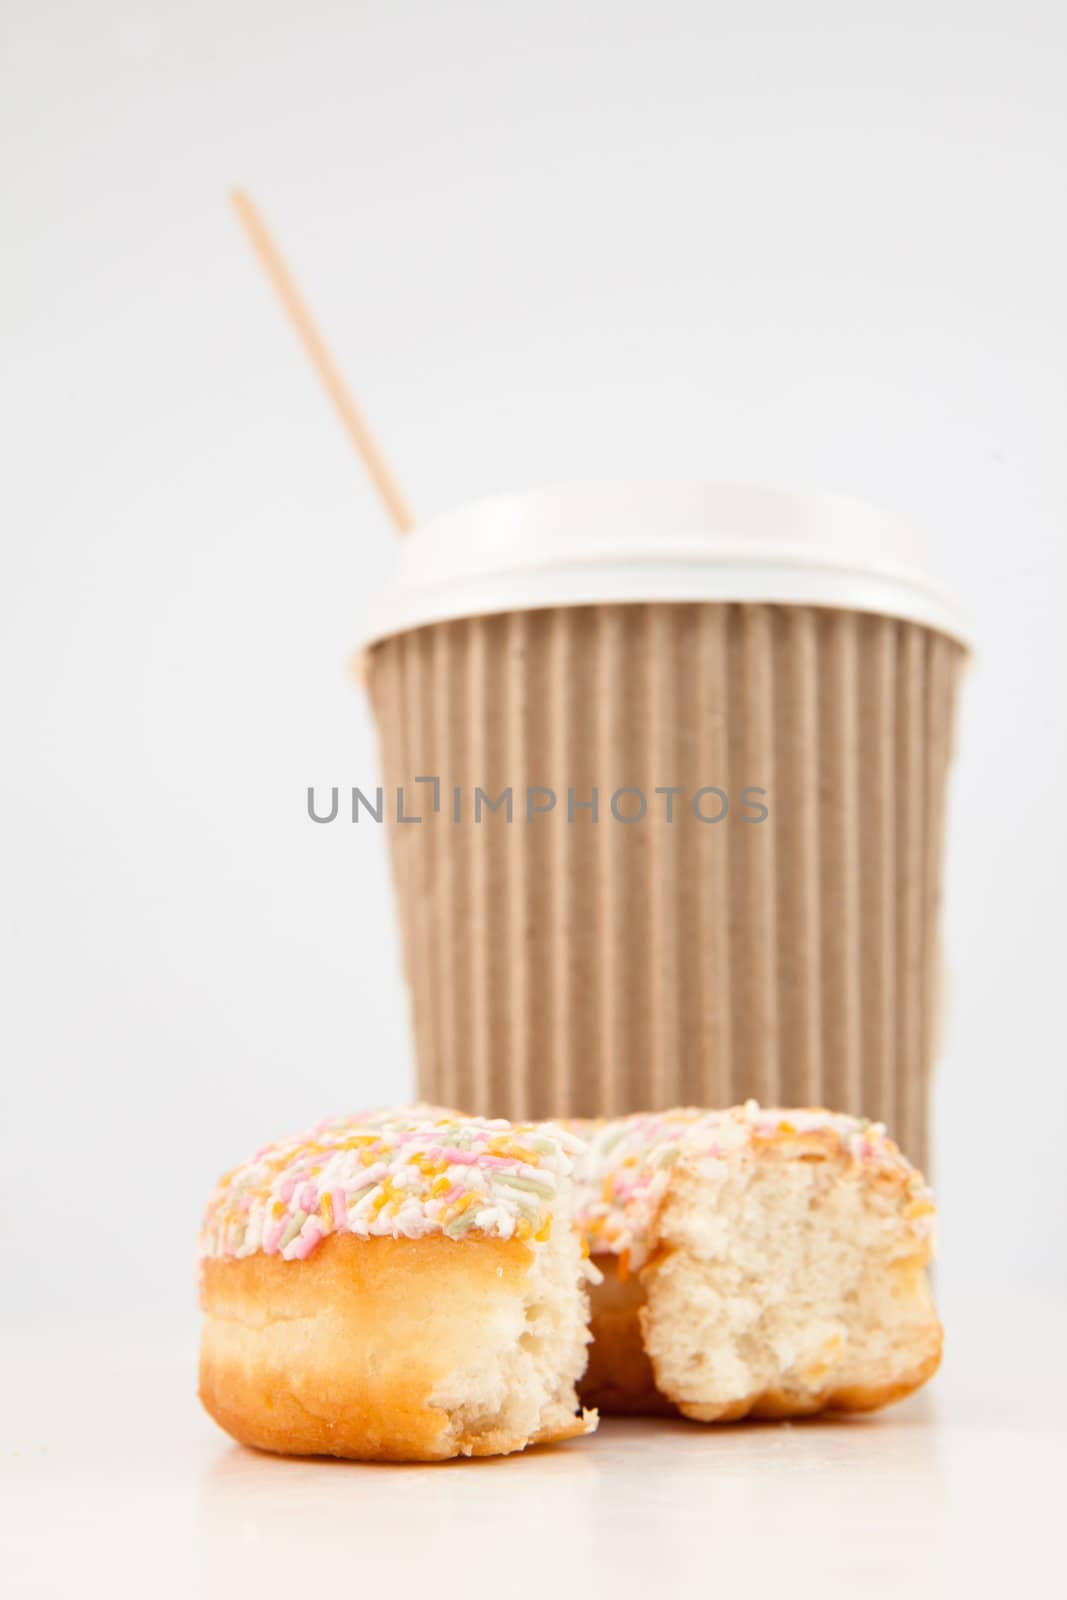 An half eaten multi coloured doughnut and a cup of tea placed together against a white background